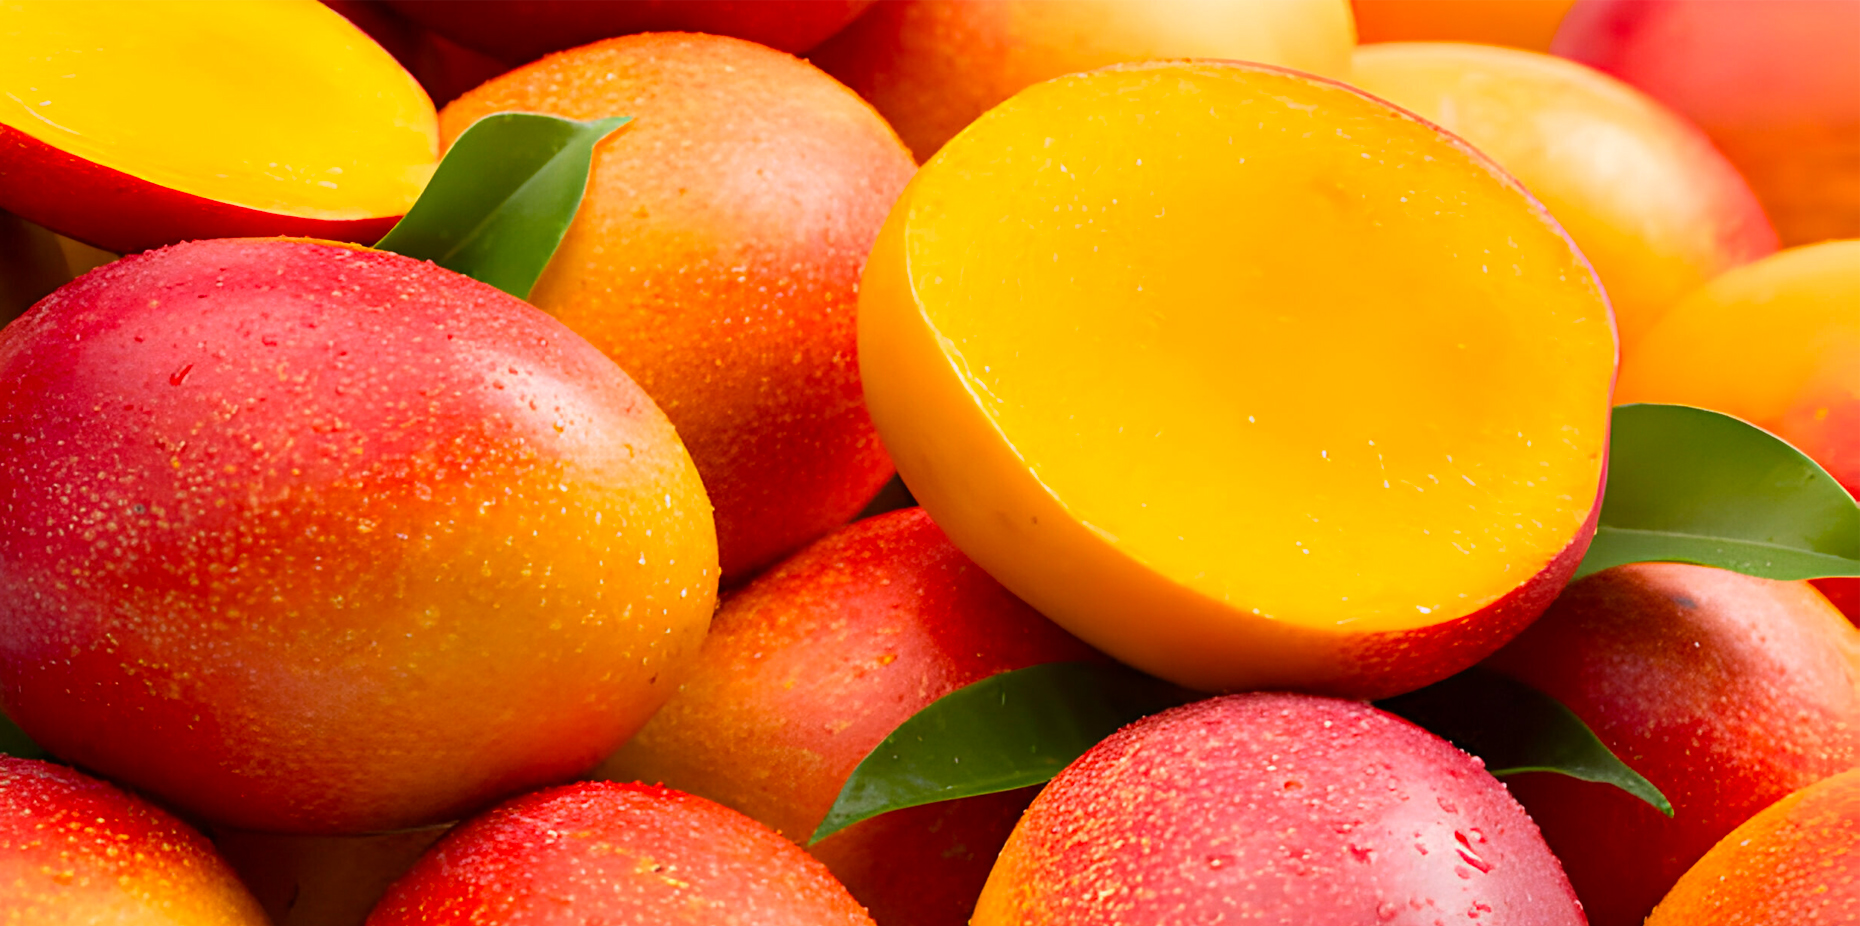 Mango: Nutrition, Facts, Benefits, & More